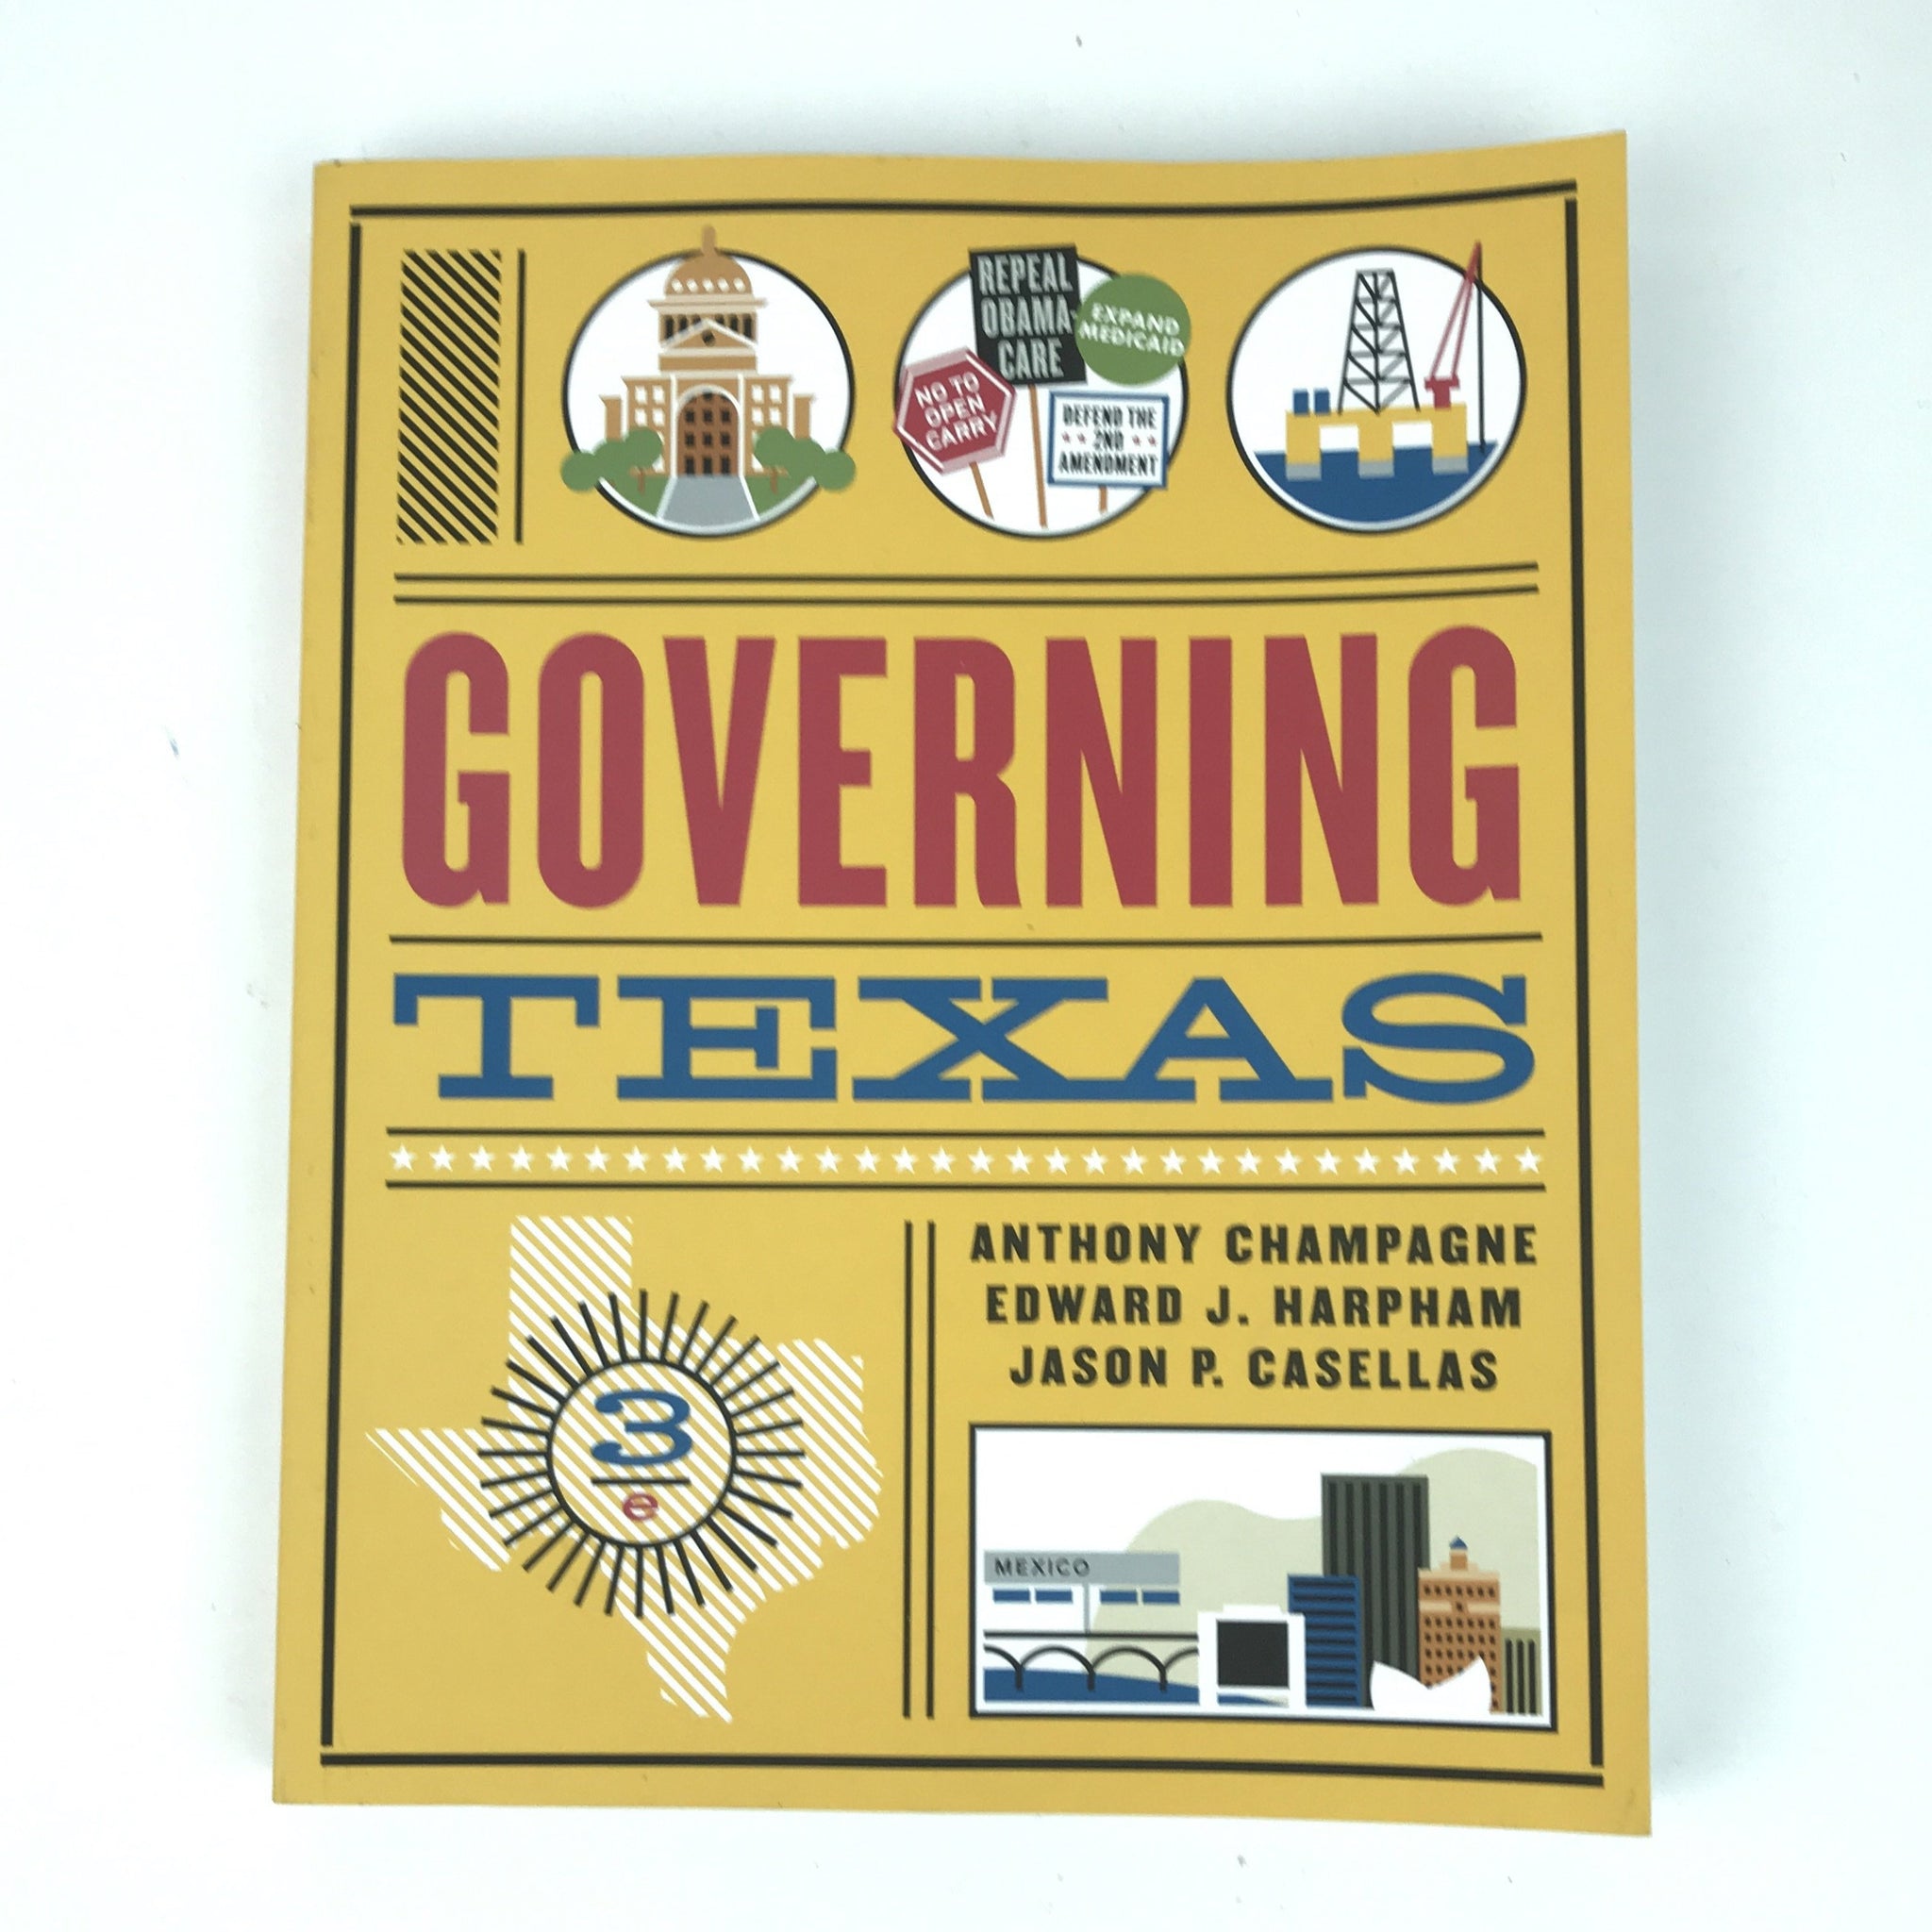 Governing Texas by Champagne, Harpham, Casellas - 3rd Edition